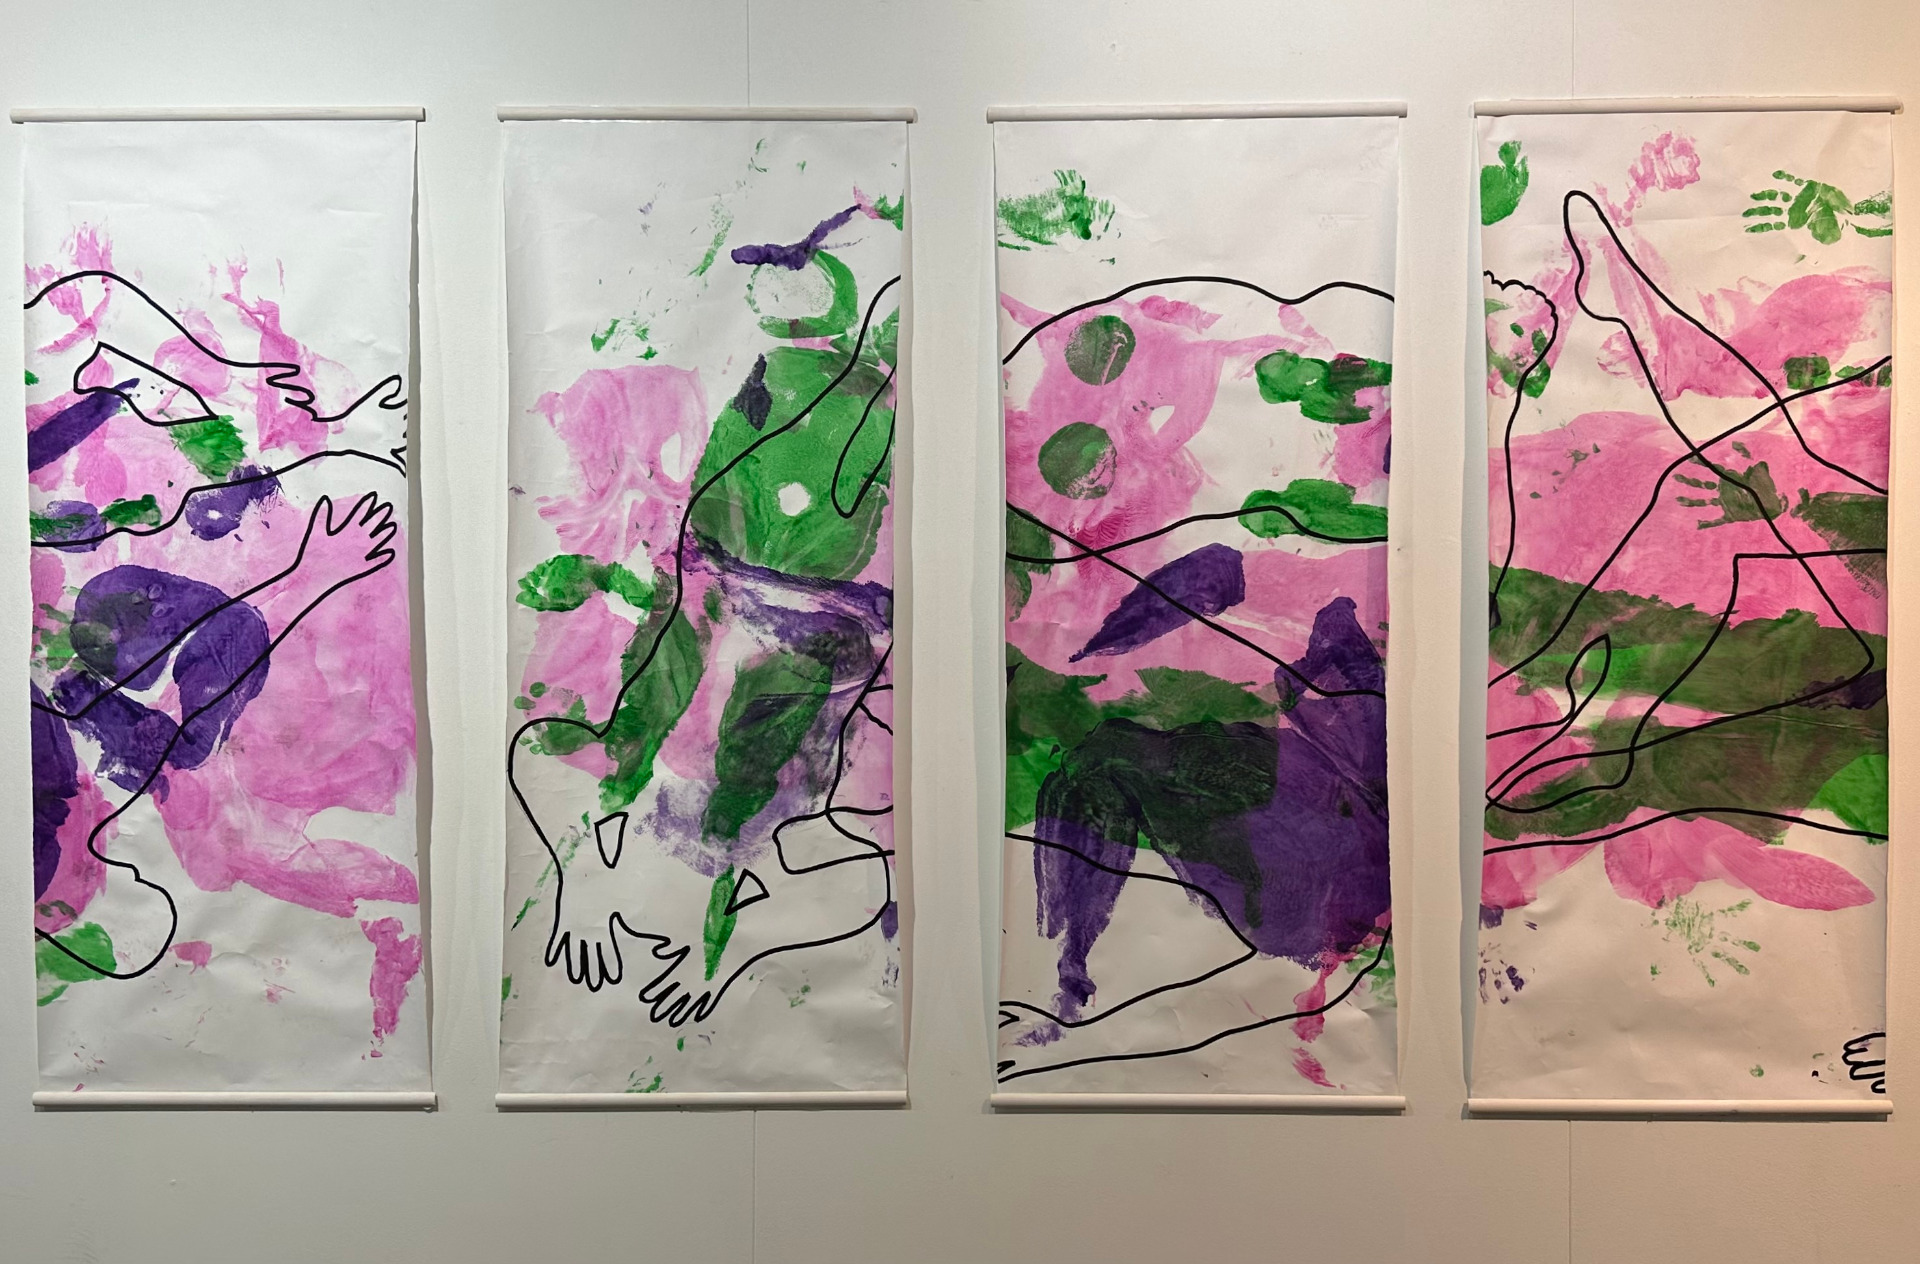 Artwork consisting of four canvases with body outlines and pink, green and purple paint